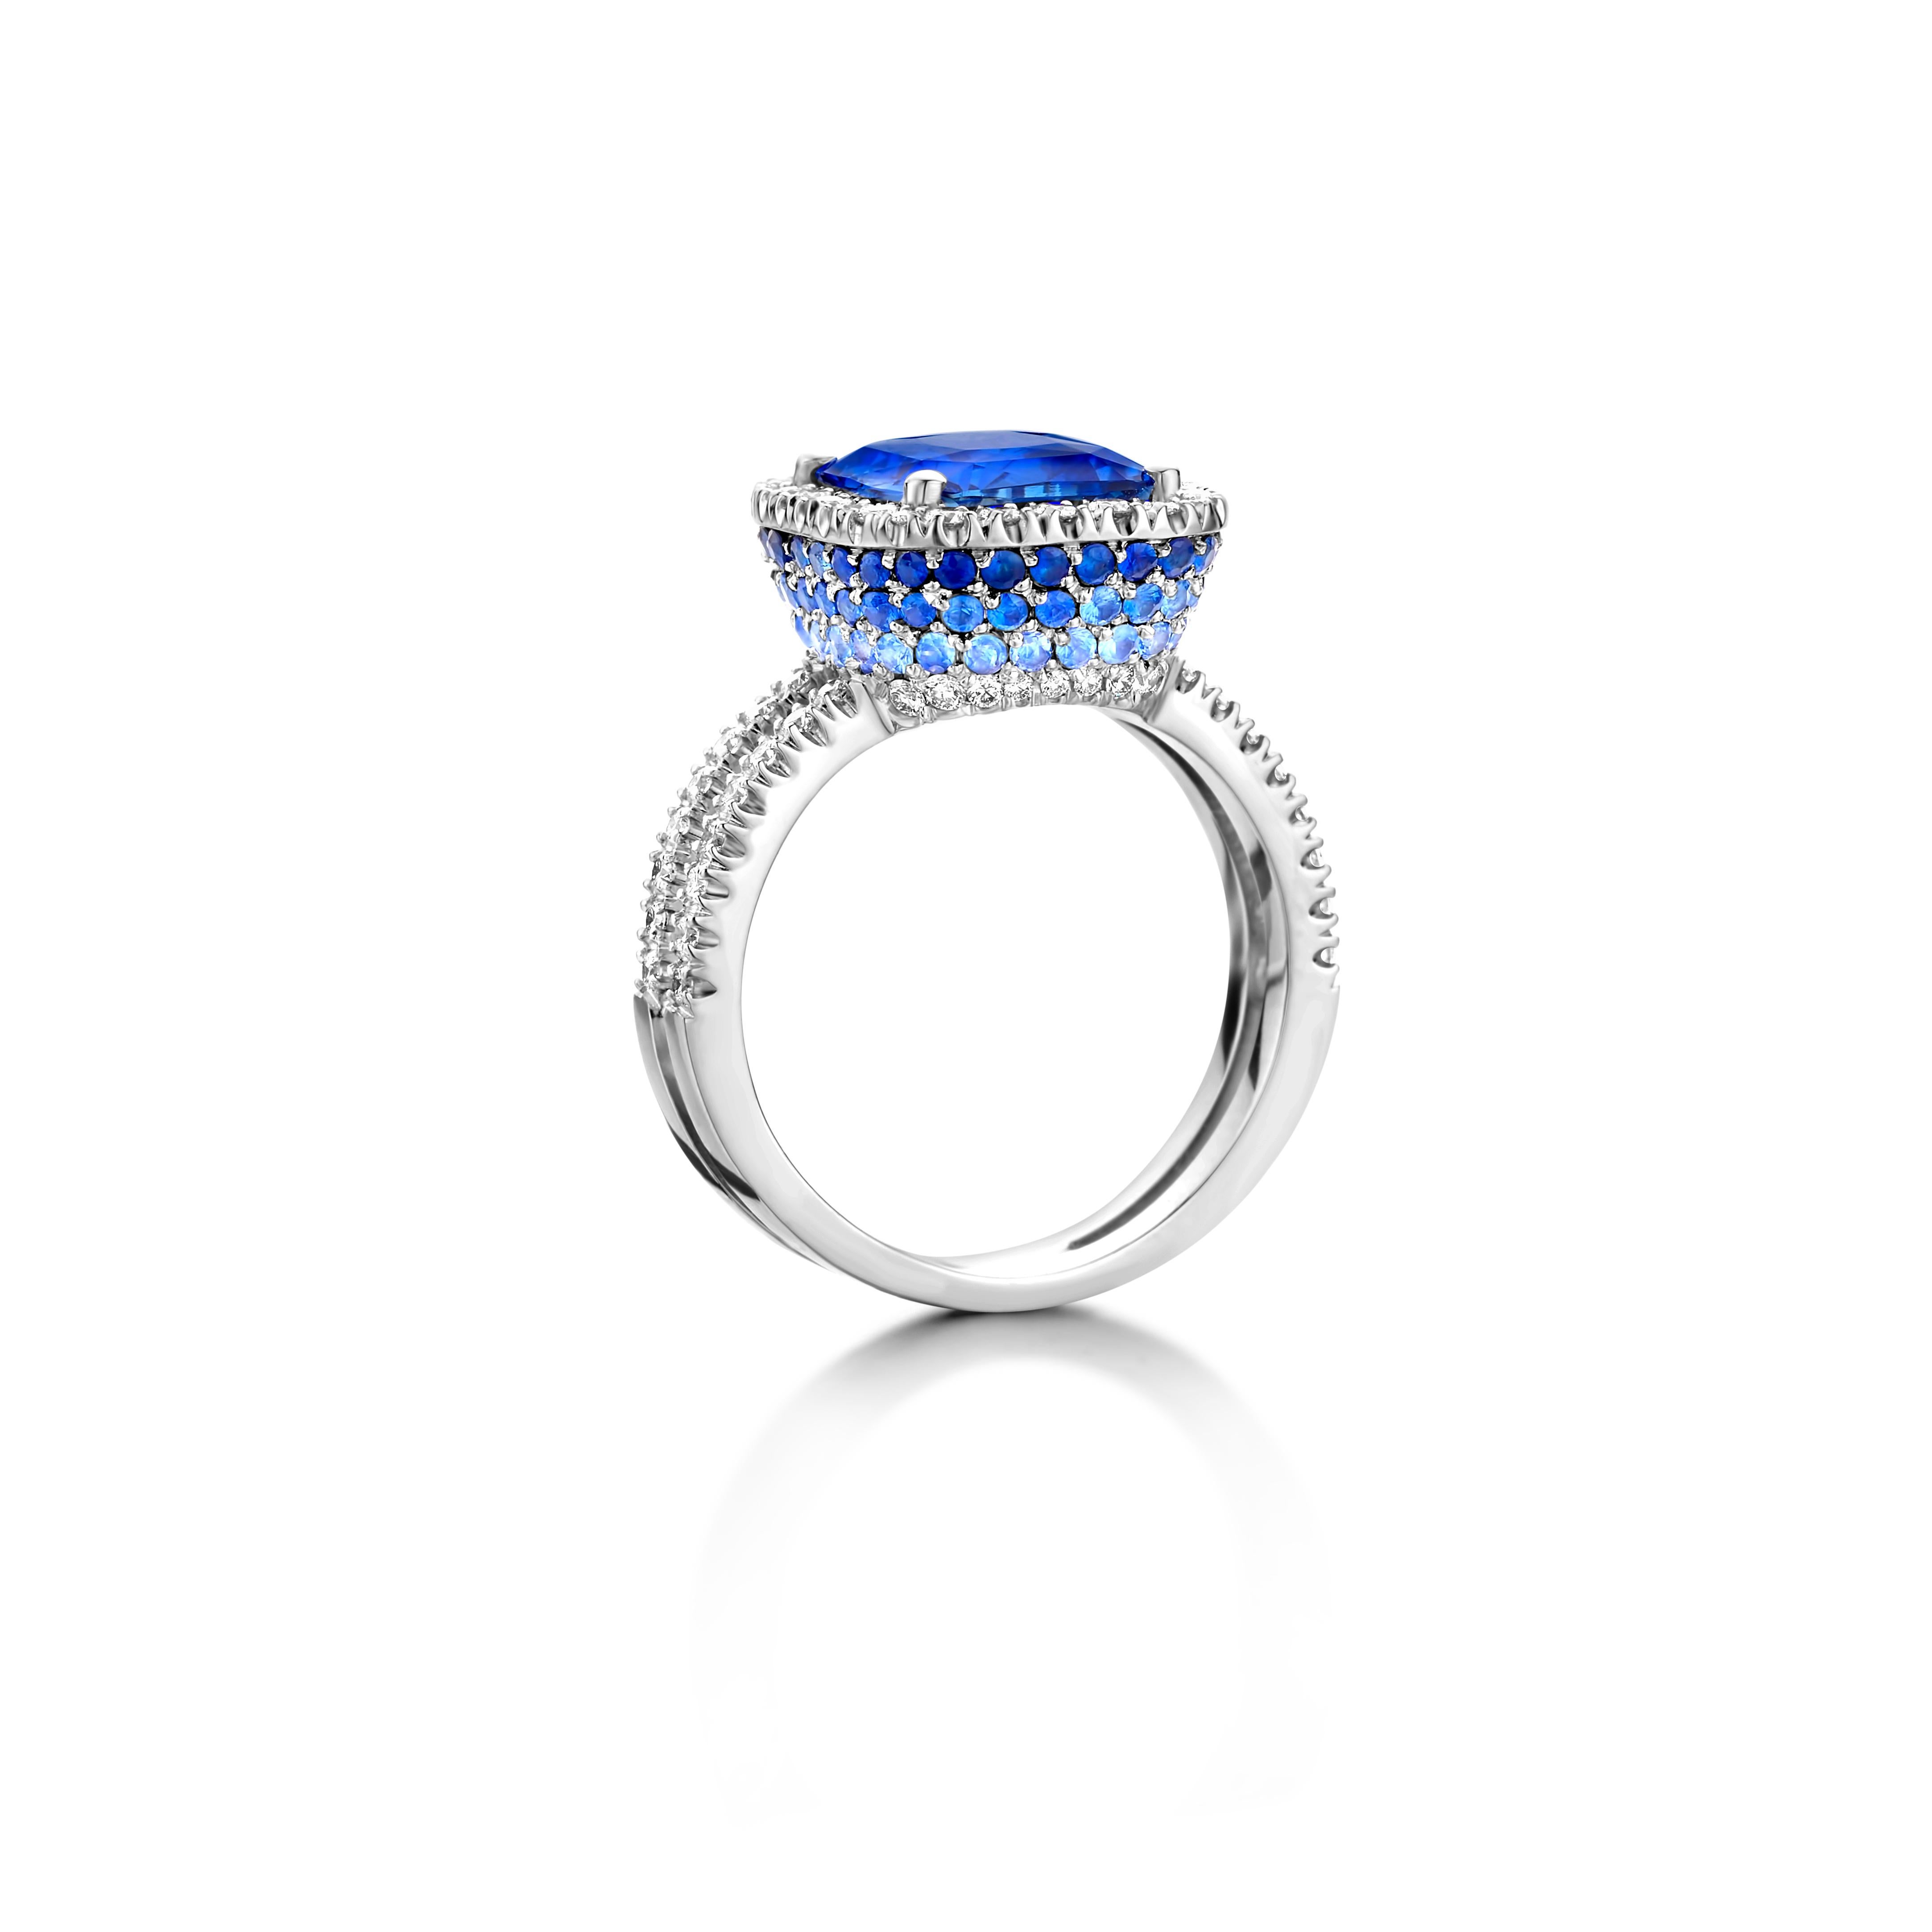 One of a kind cocktail ring in 18-Karat white gold (7,5g) set with 1 natural corundum eye clean cushion rectangular unheated cornflower blue sapphire. The sides of the crown are set with dégradé pavé blue sapphires in dark, medium and light tones.